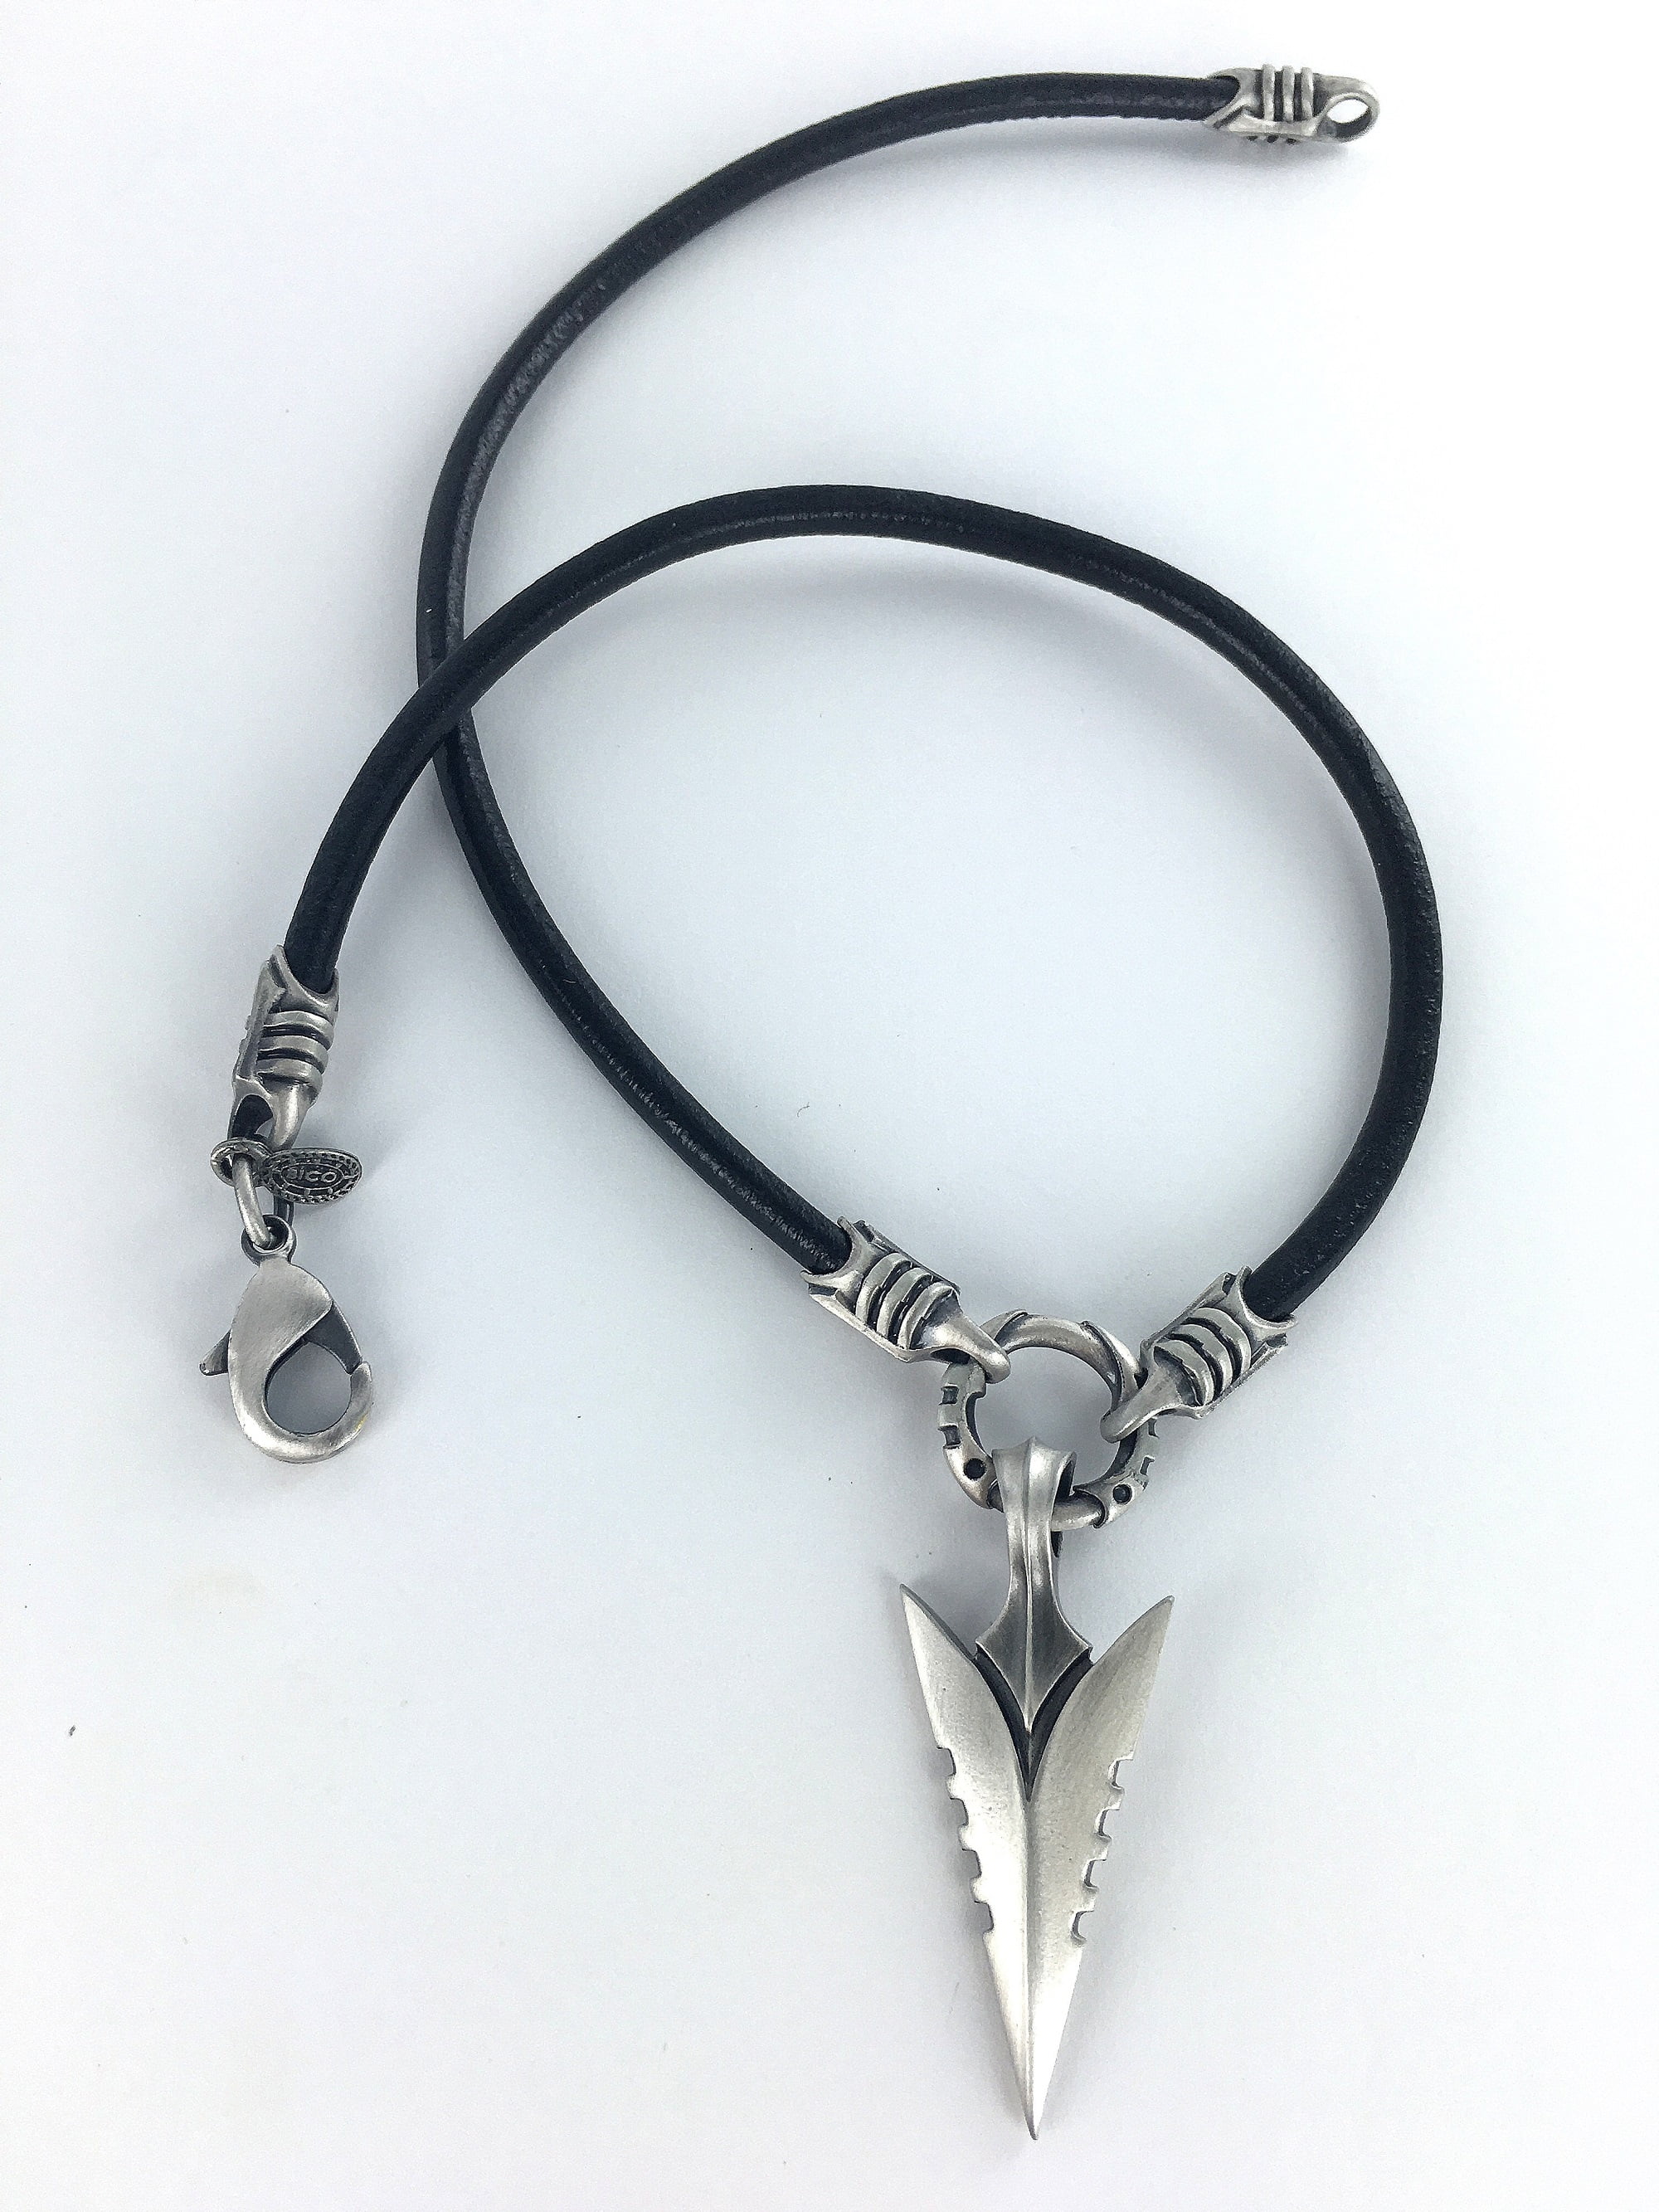 Men's Silver Necklace Mens Jewelry-Gift for Him Triangle Arrow Head Pendant